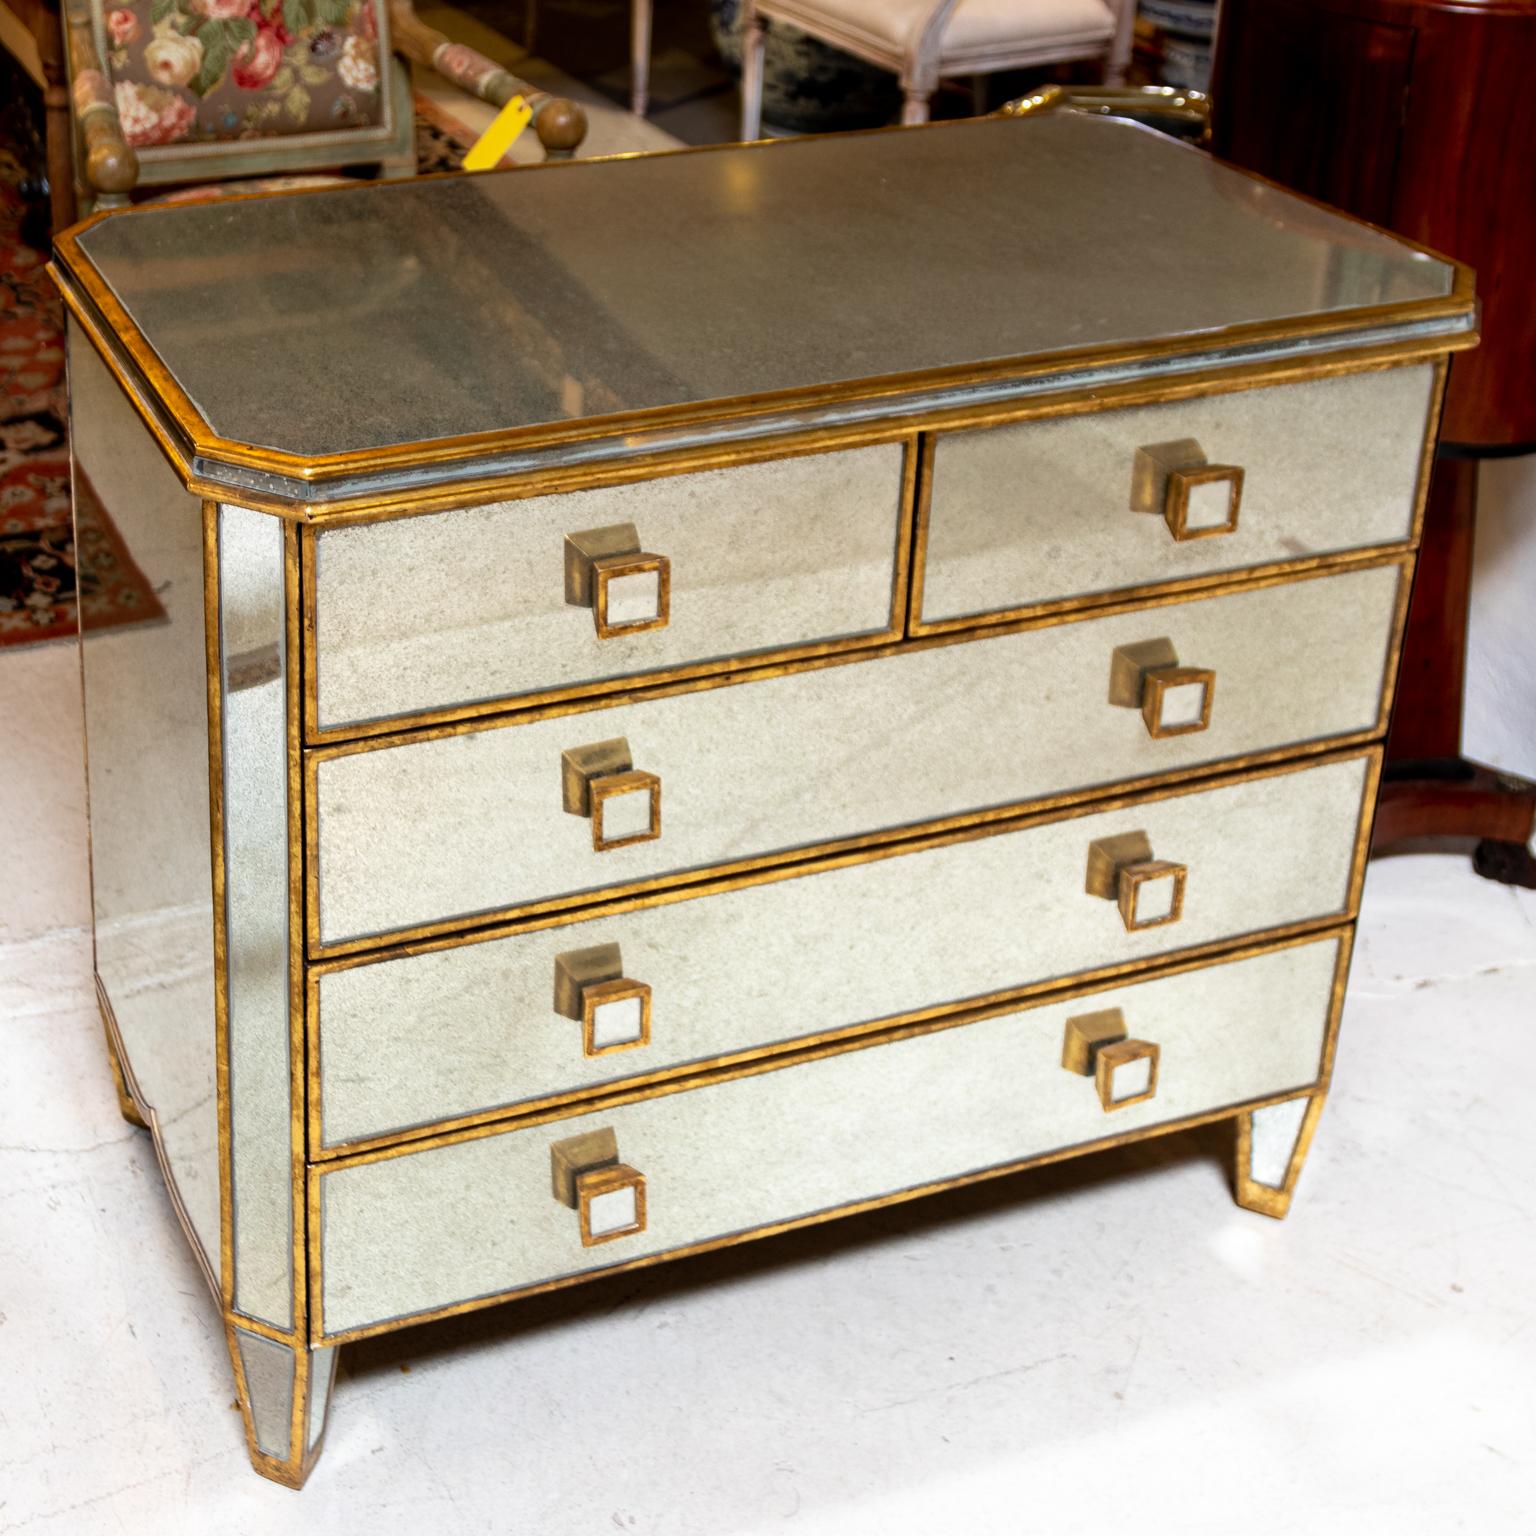 Circa mid-20th century vintage Hollywood Regency style mirrored chest of drawers with gold gilded accent trim, square pulls, and plain tapered legs. Made in Italy. Please note of wear consistent with age.